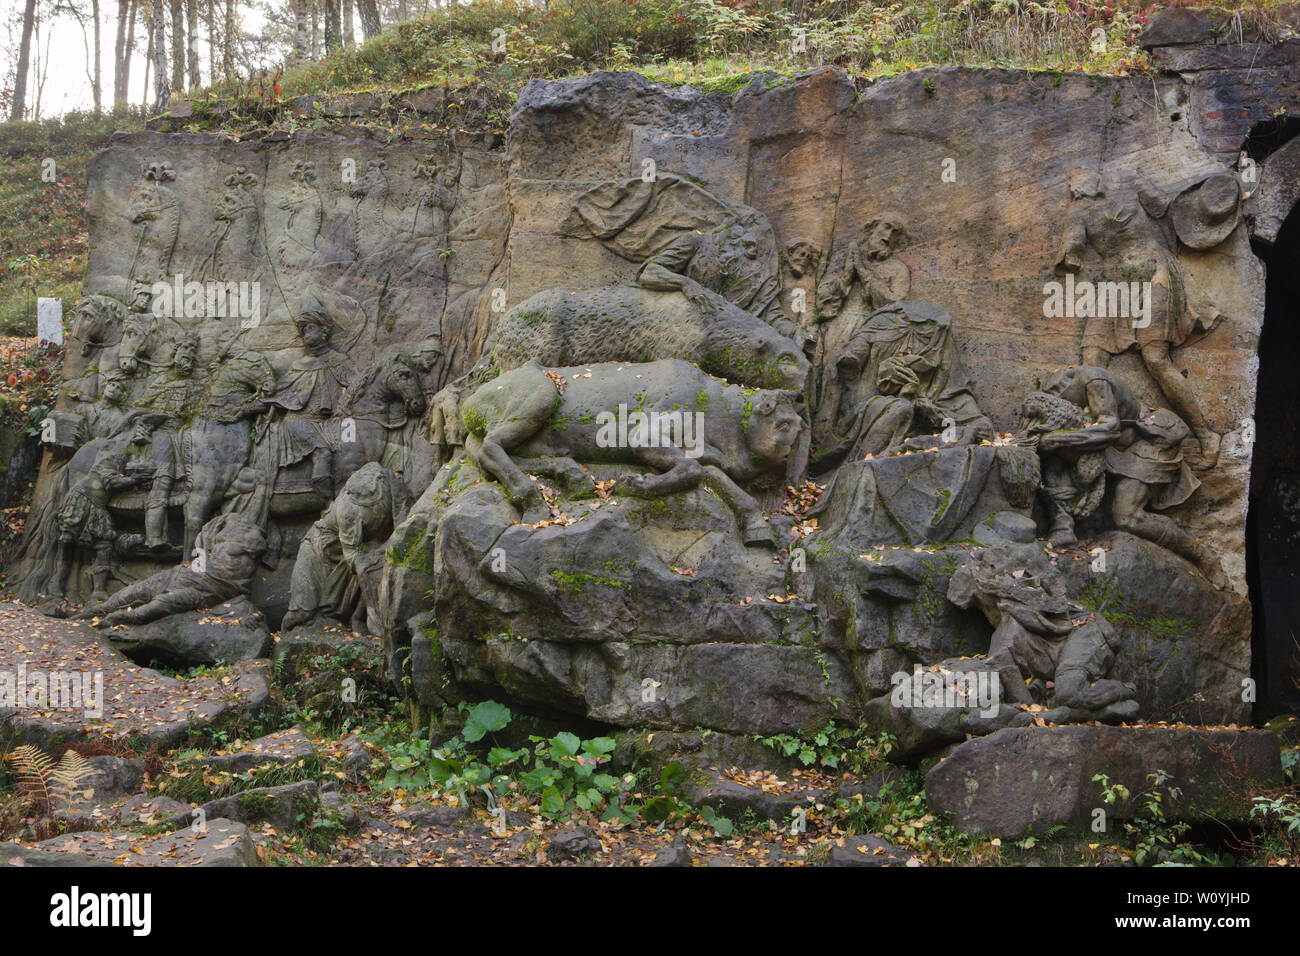 Two abandoned relieves 'Adoration of the Magi' and 'Nativity of Jesus' (R)  in the area of the open air sculptural gallery known as the Braunův Betlém  (Braun's Bethlehem) in the forest near